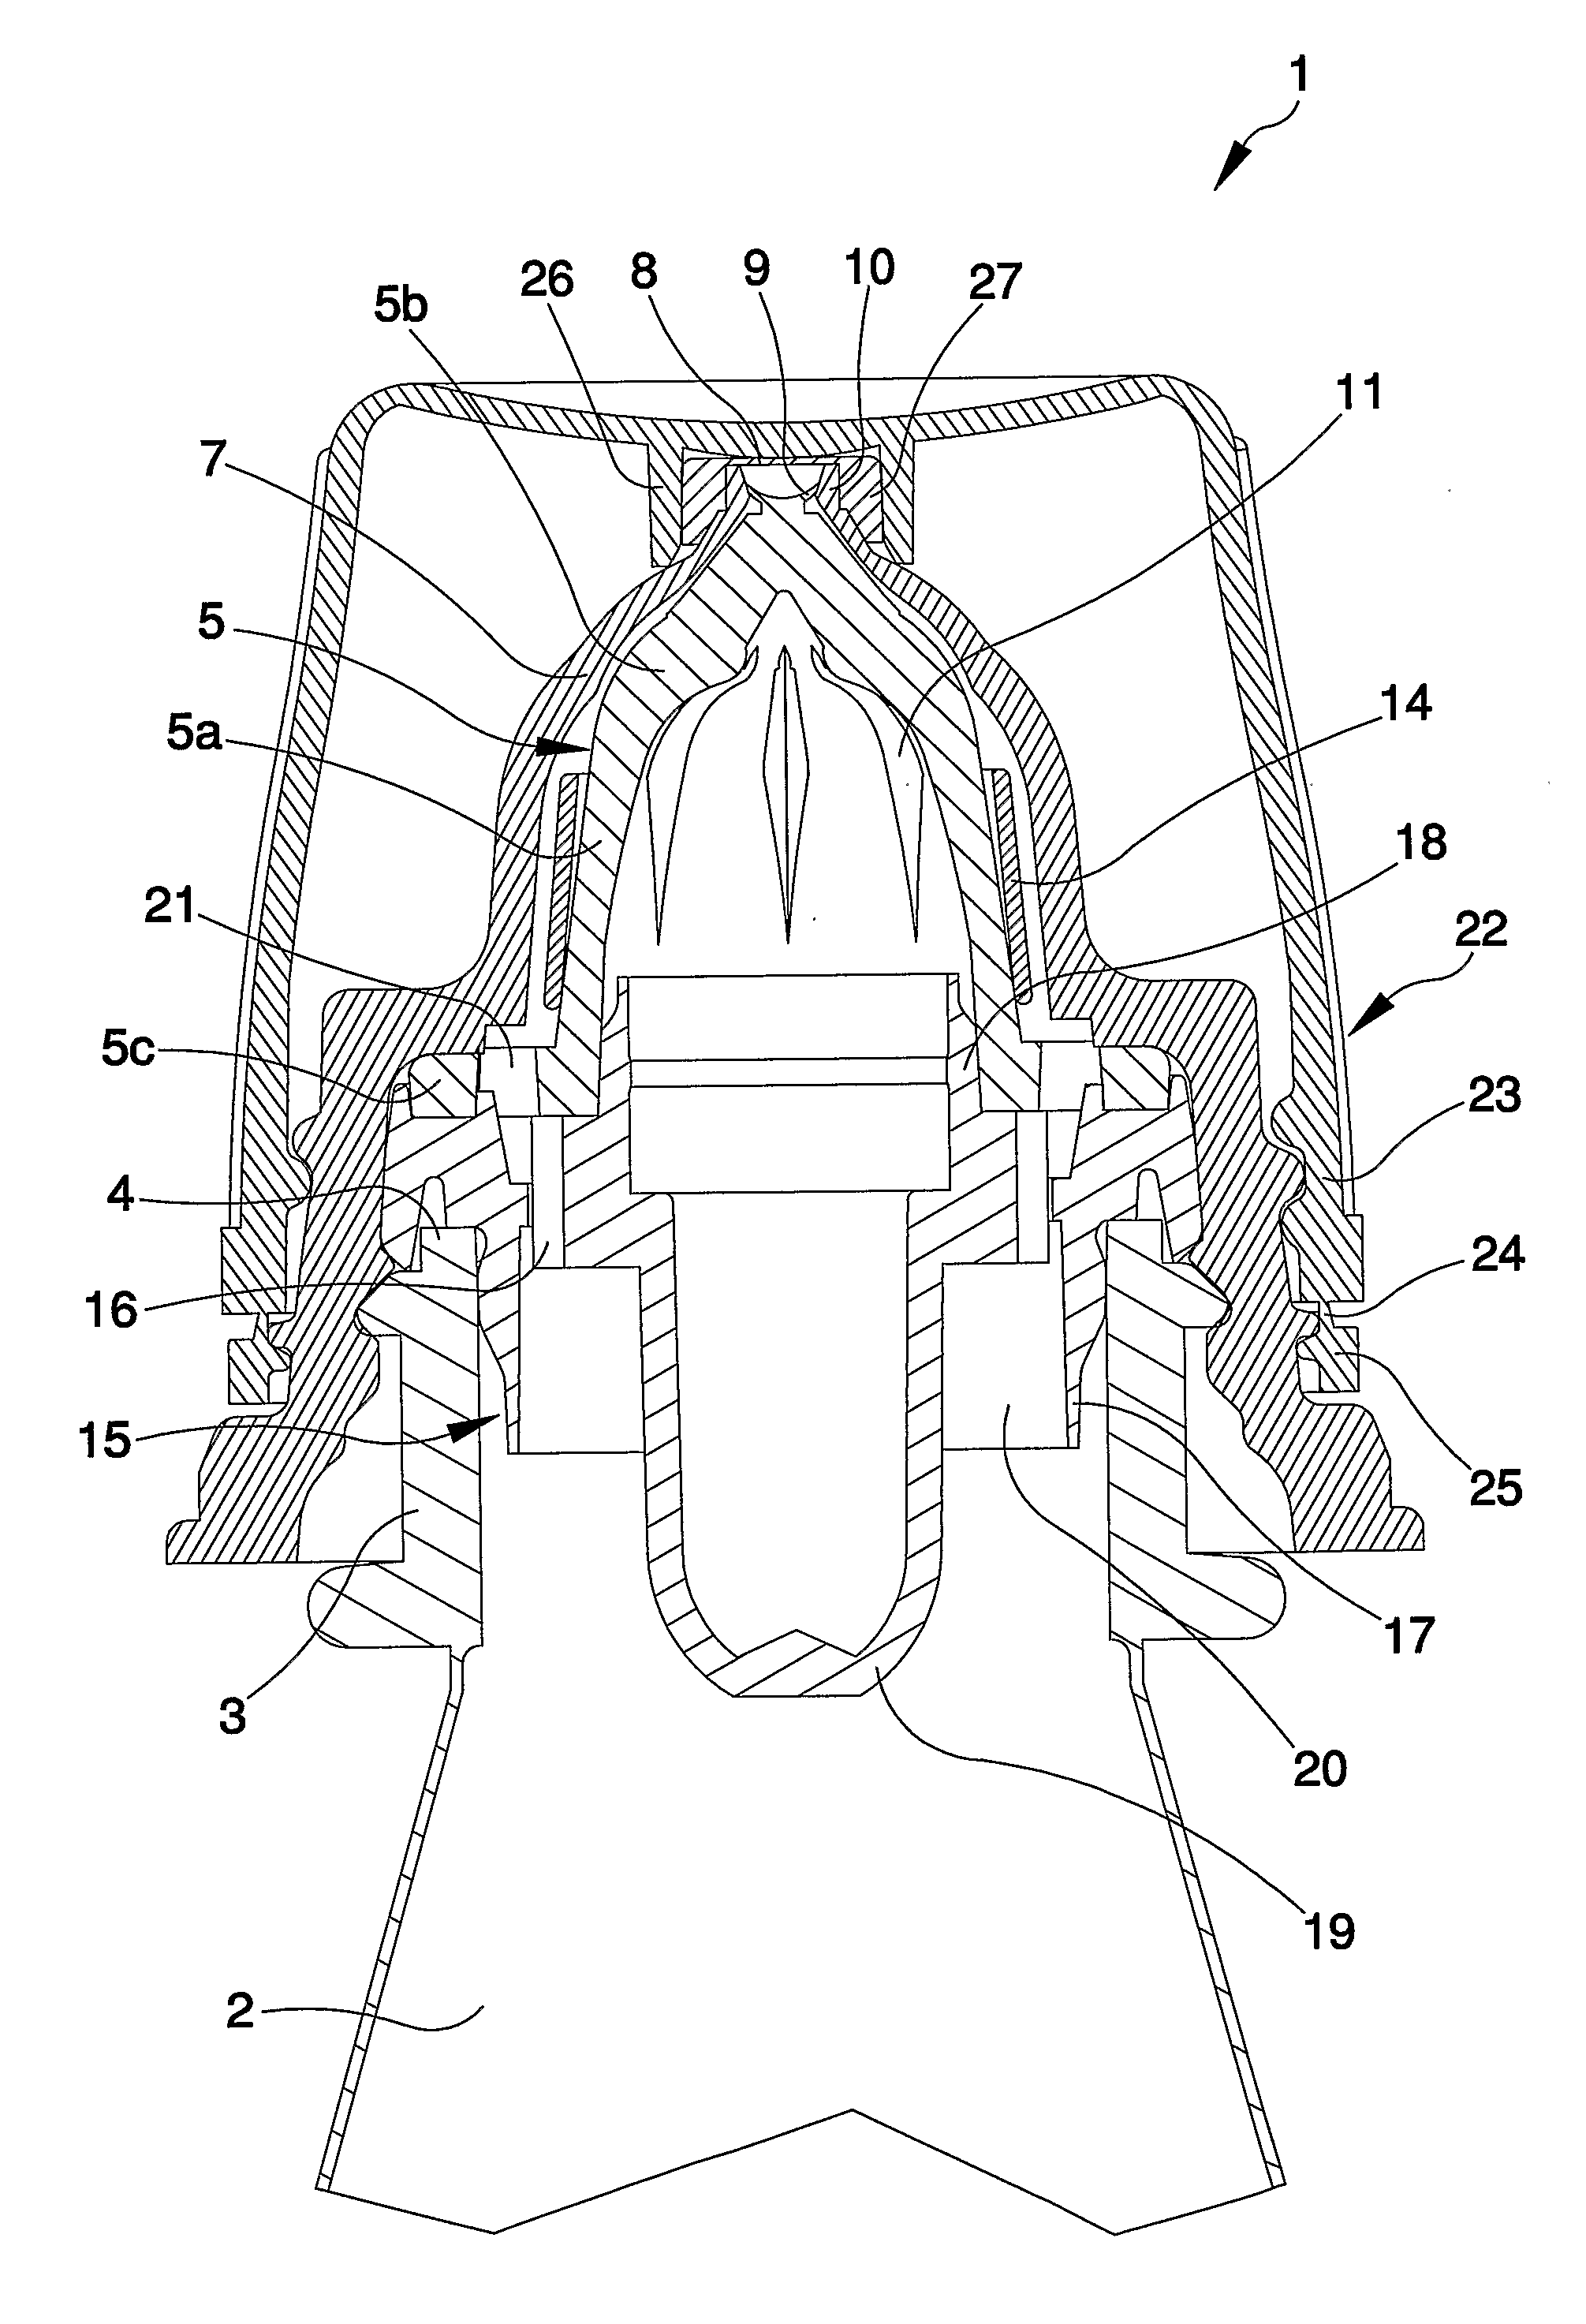 Bottle for containing fluids, particularly for pharmaceutical products or the like